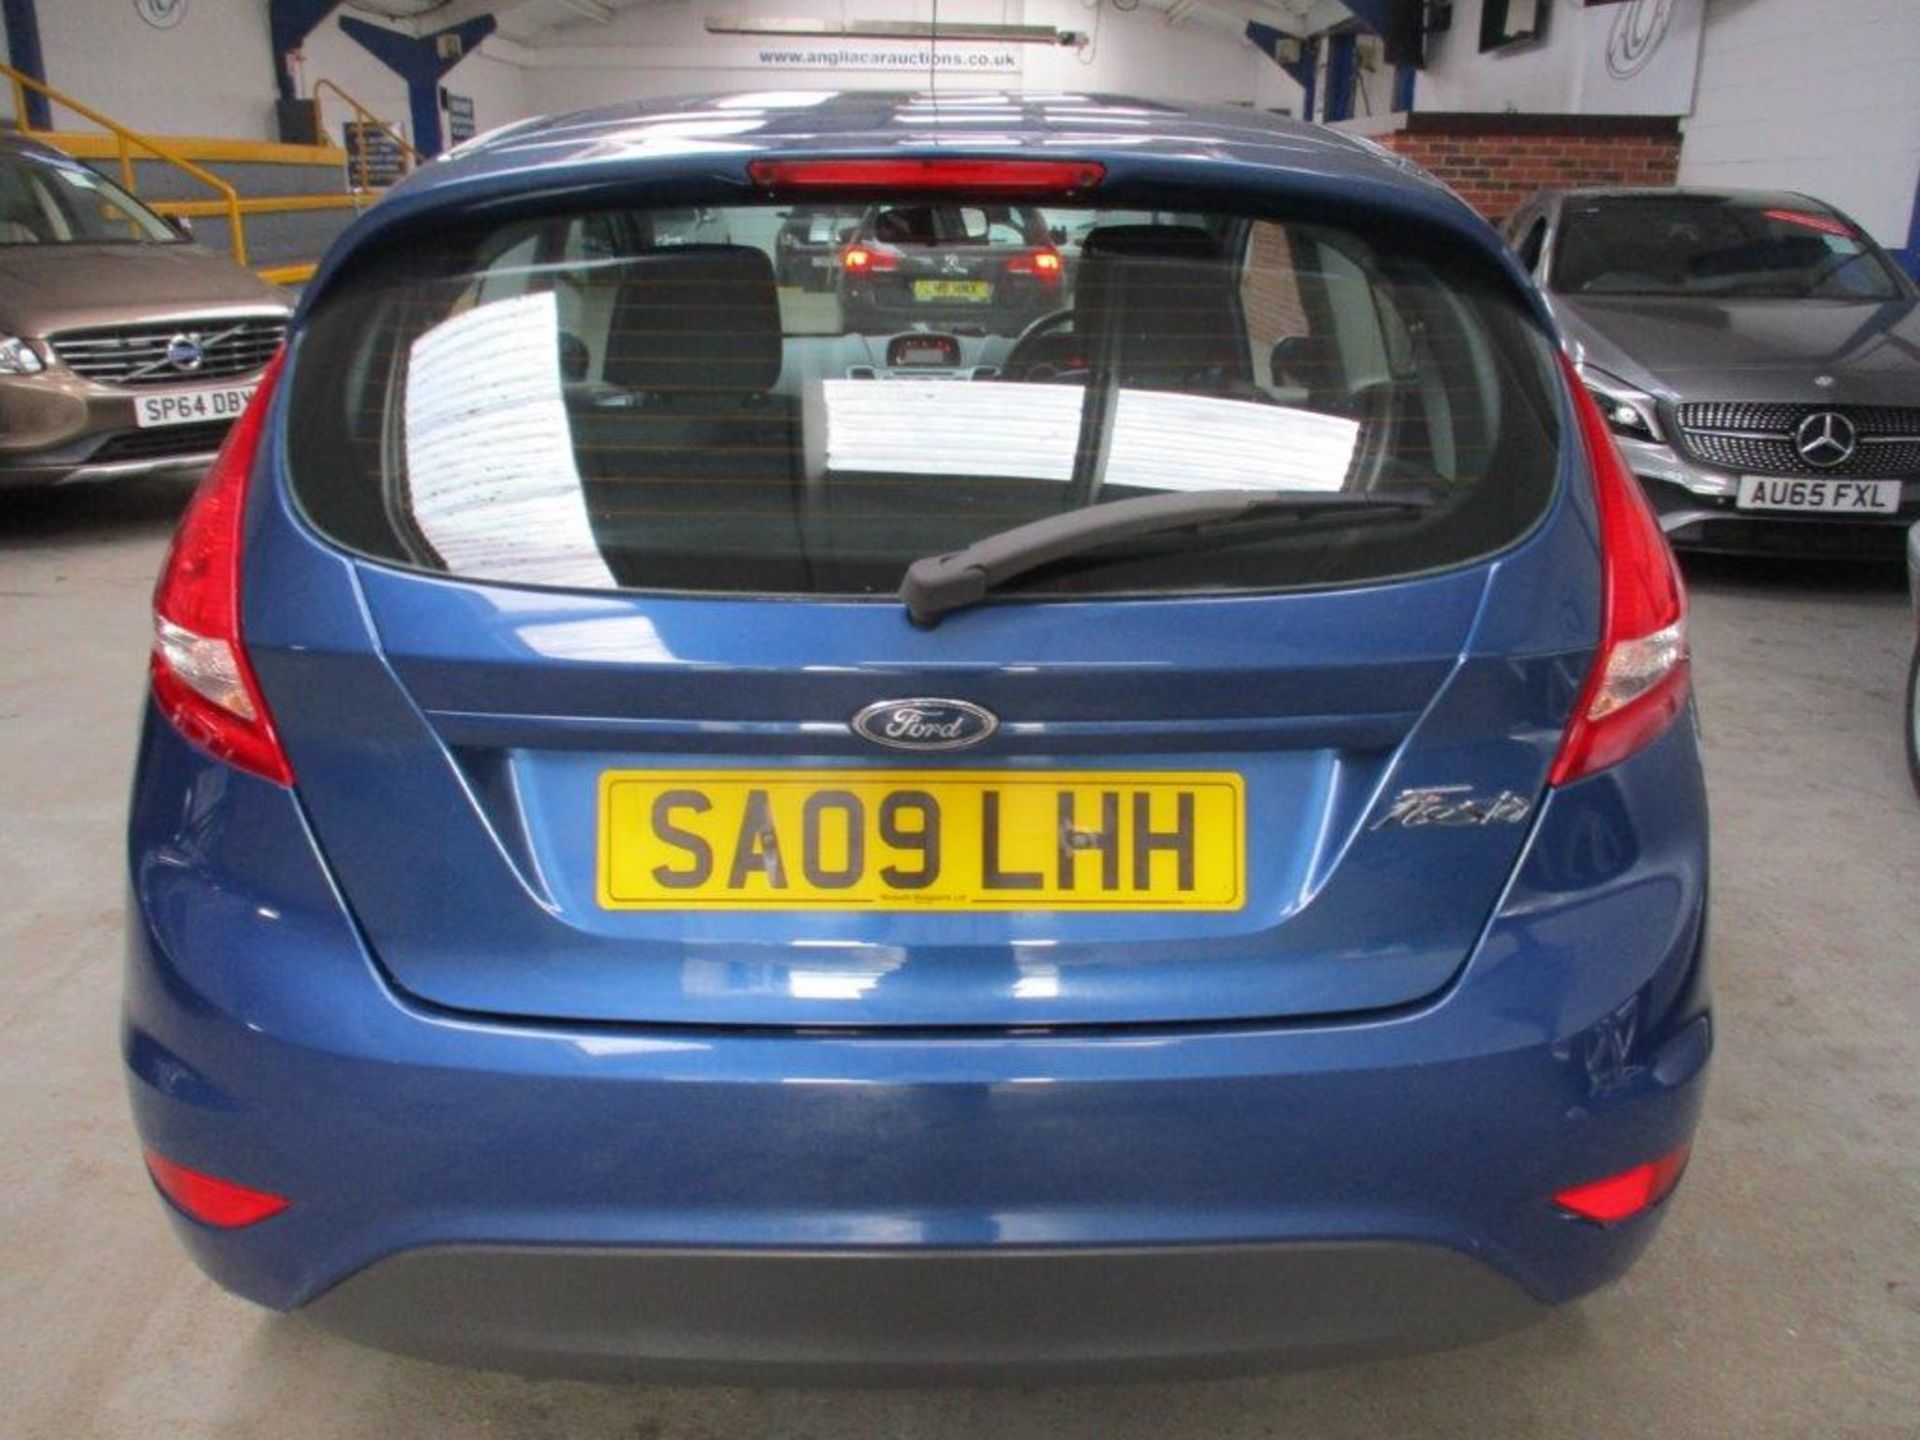 09 09 Ford Fiesta Style 82 - Image 3 of 16